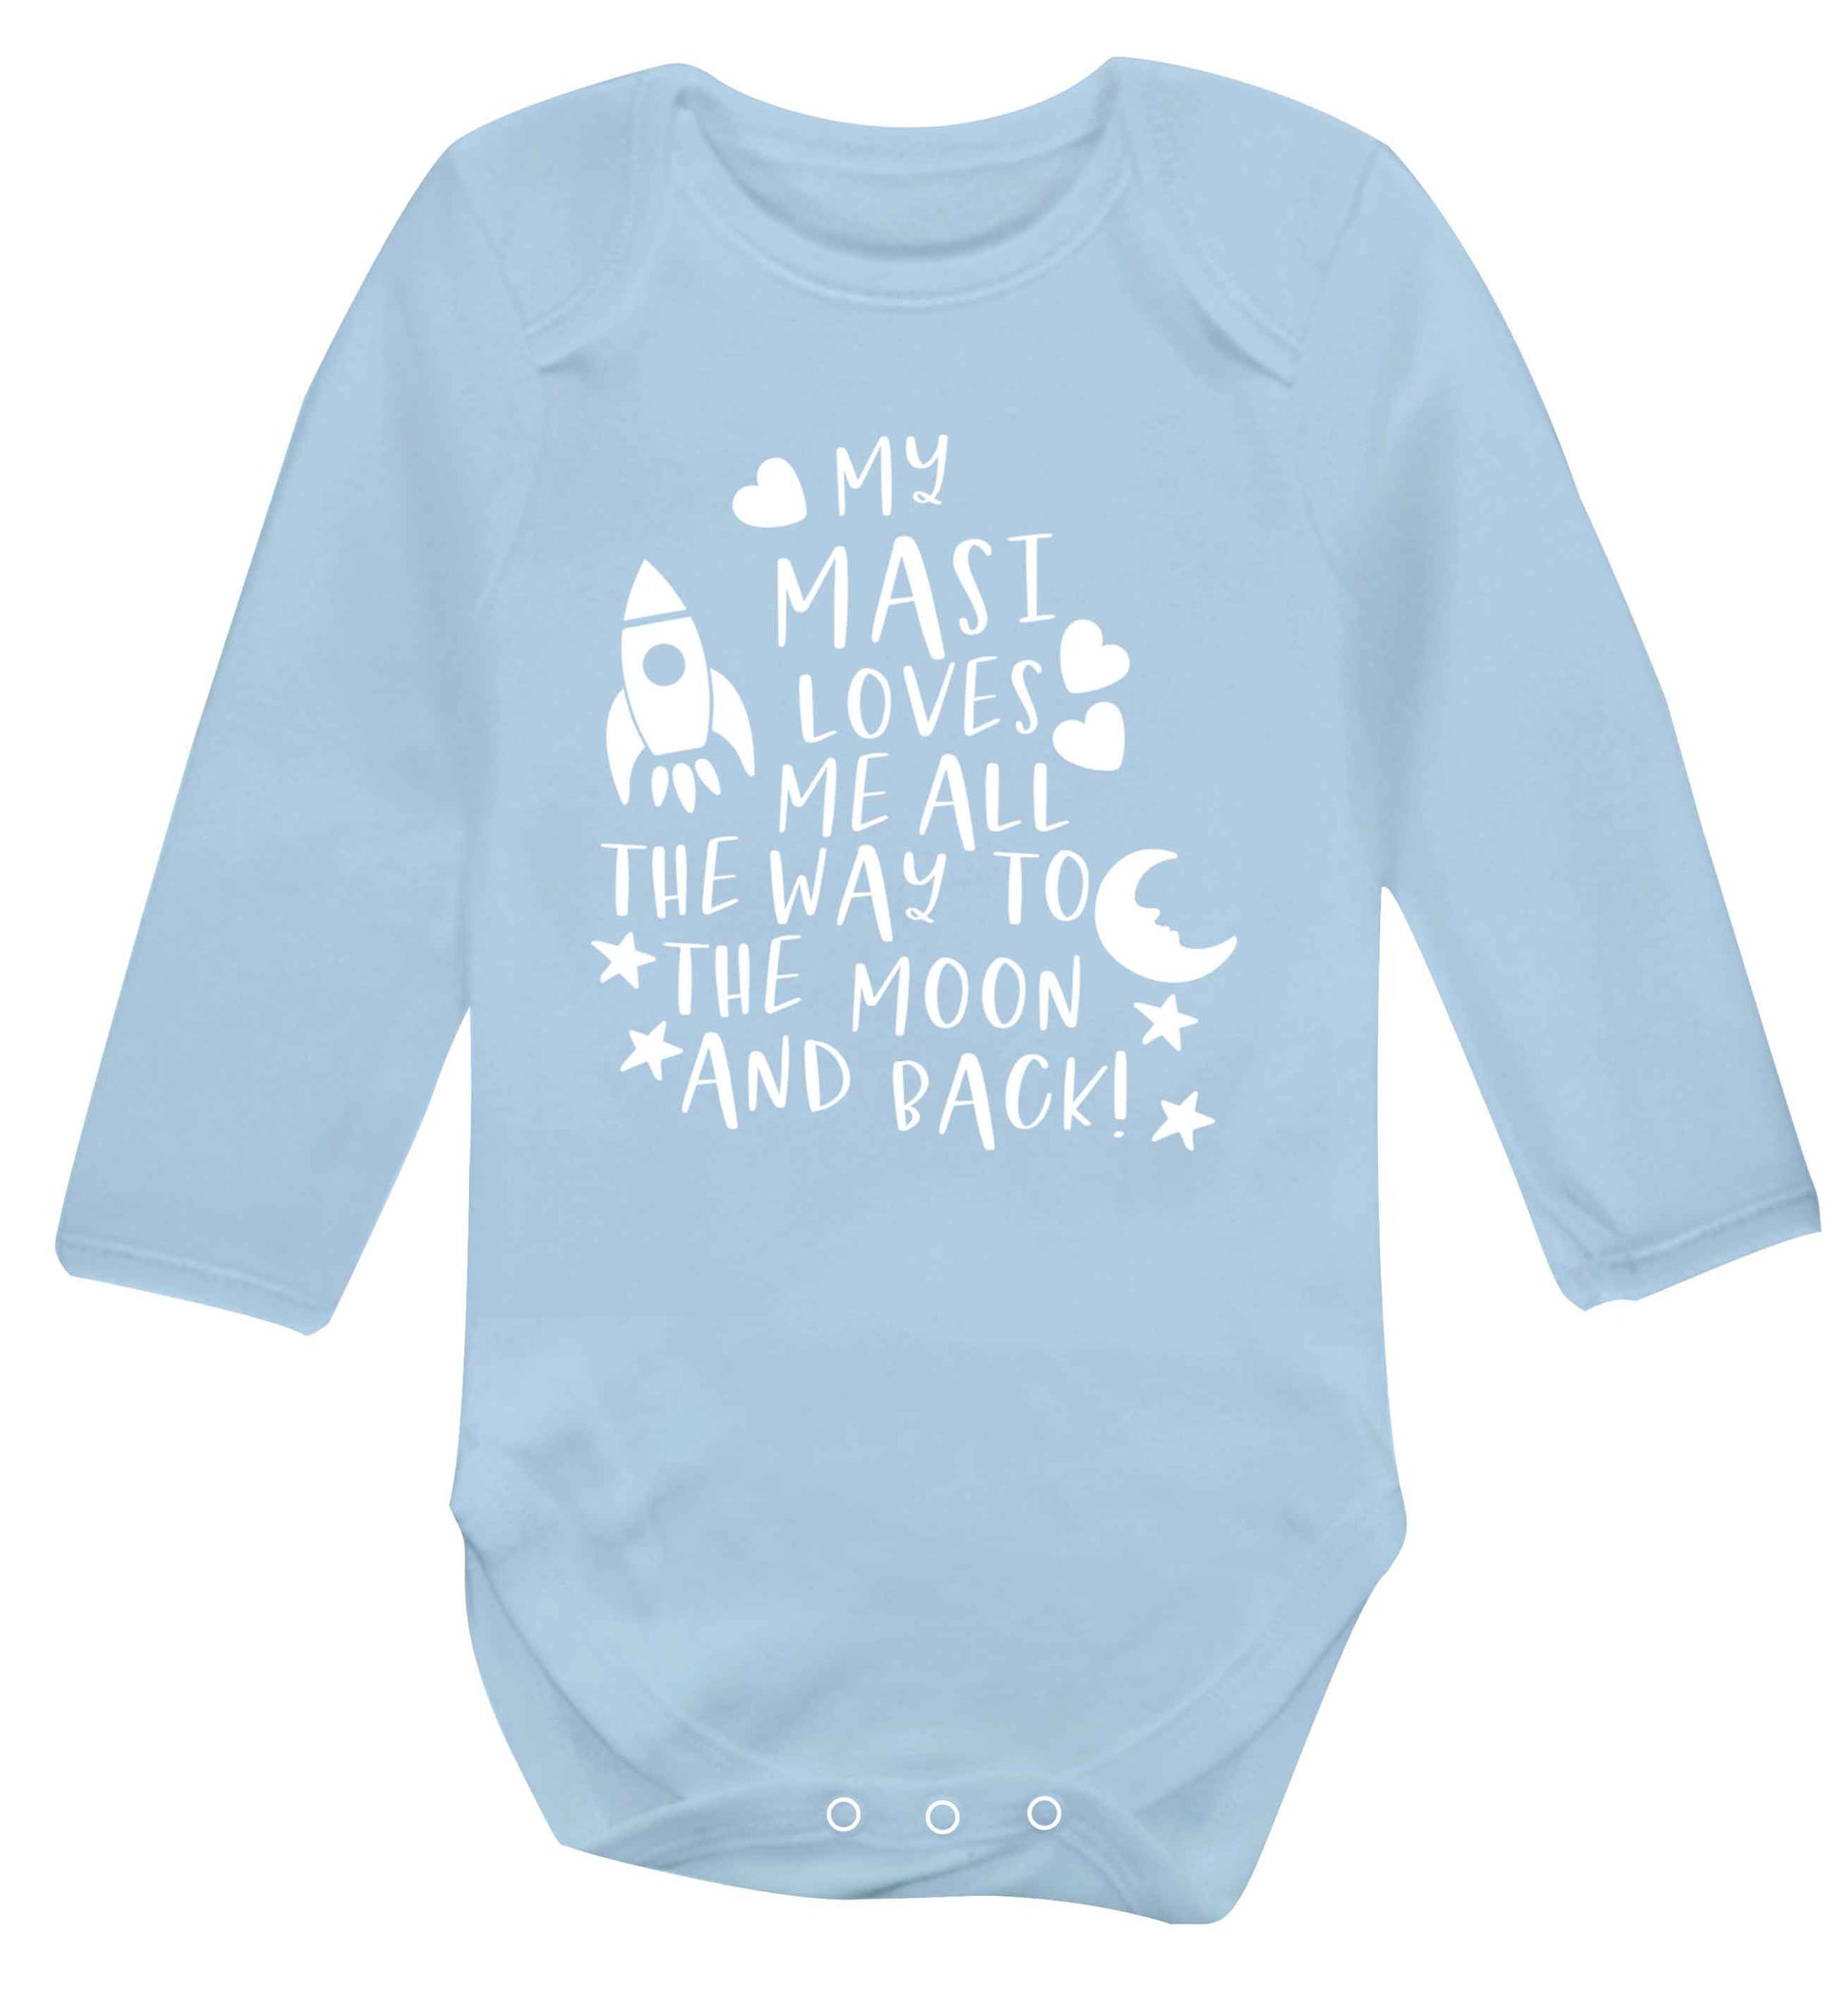 My masi loves me all the way to the moon and back Baby Vest long sleeved pale blue 6-12 months